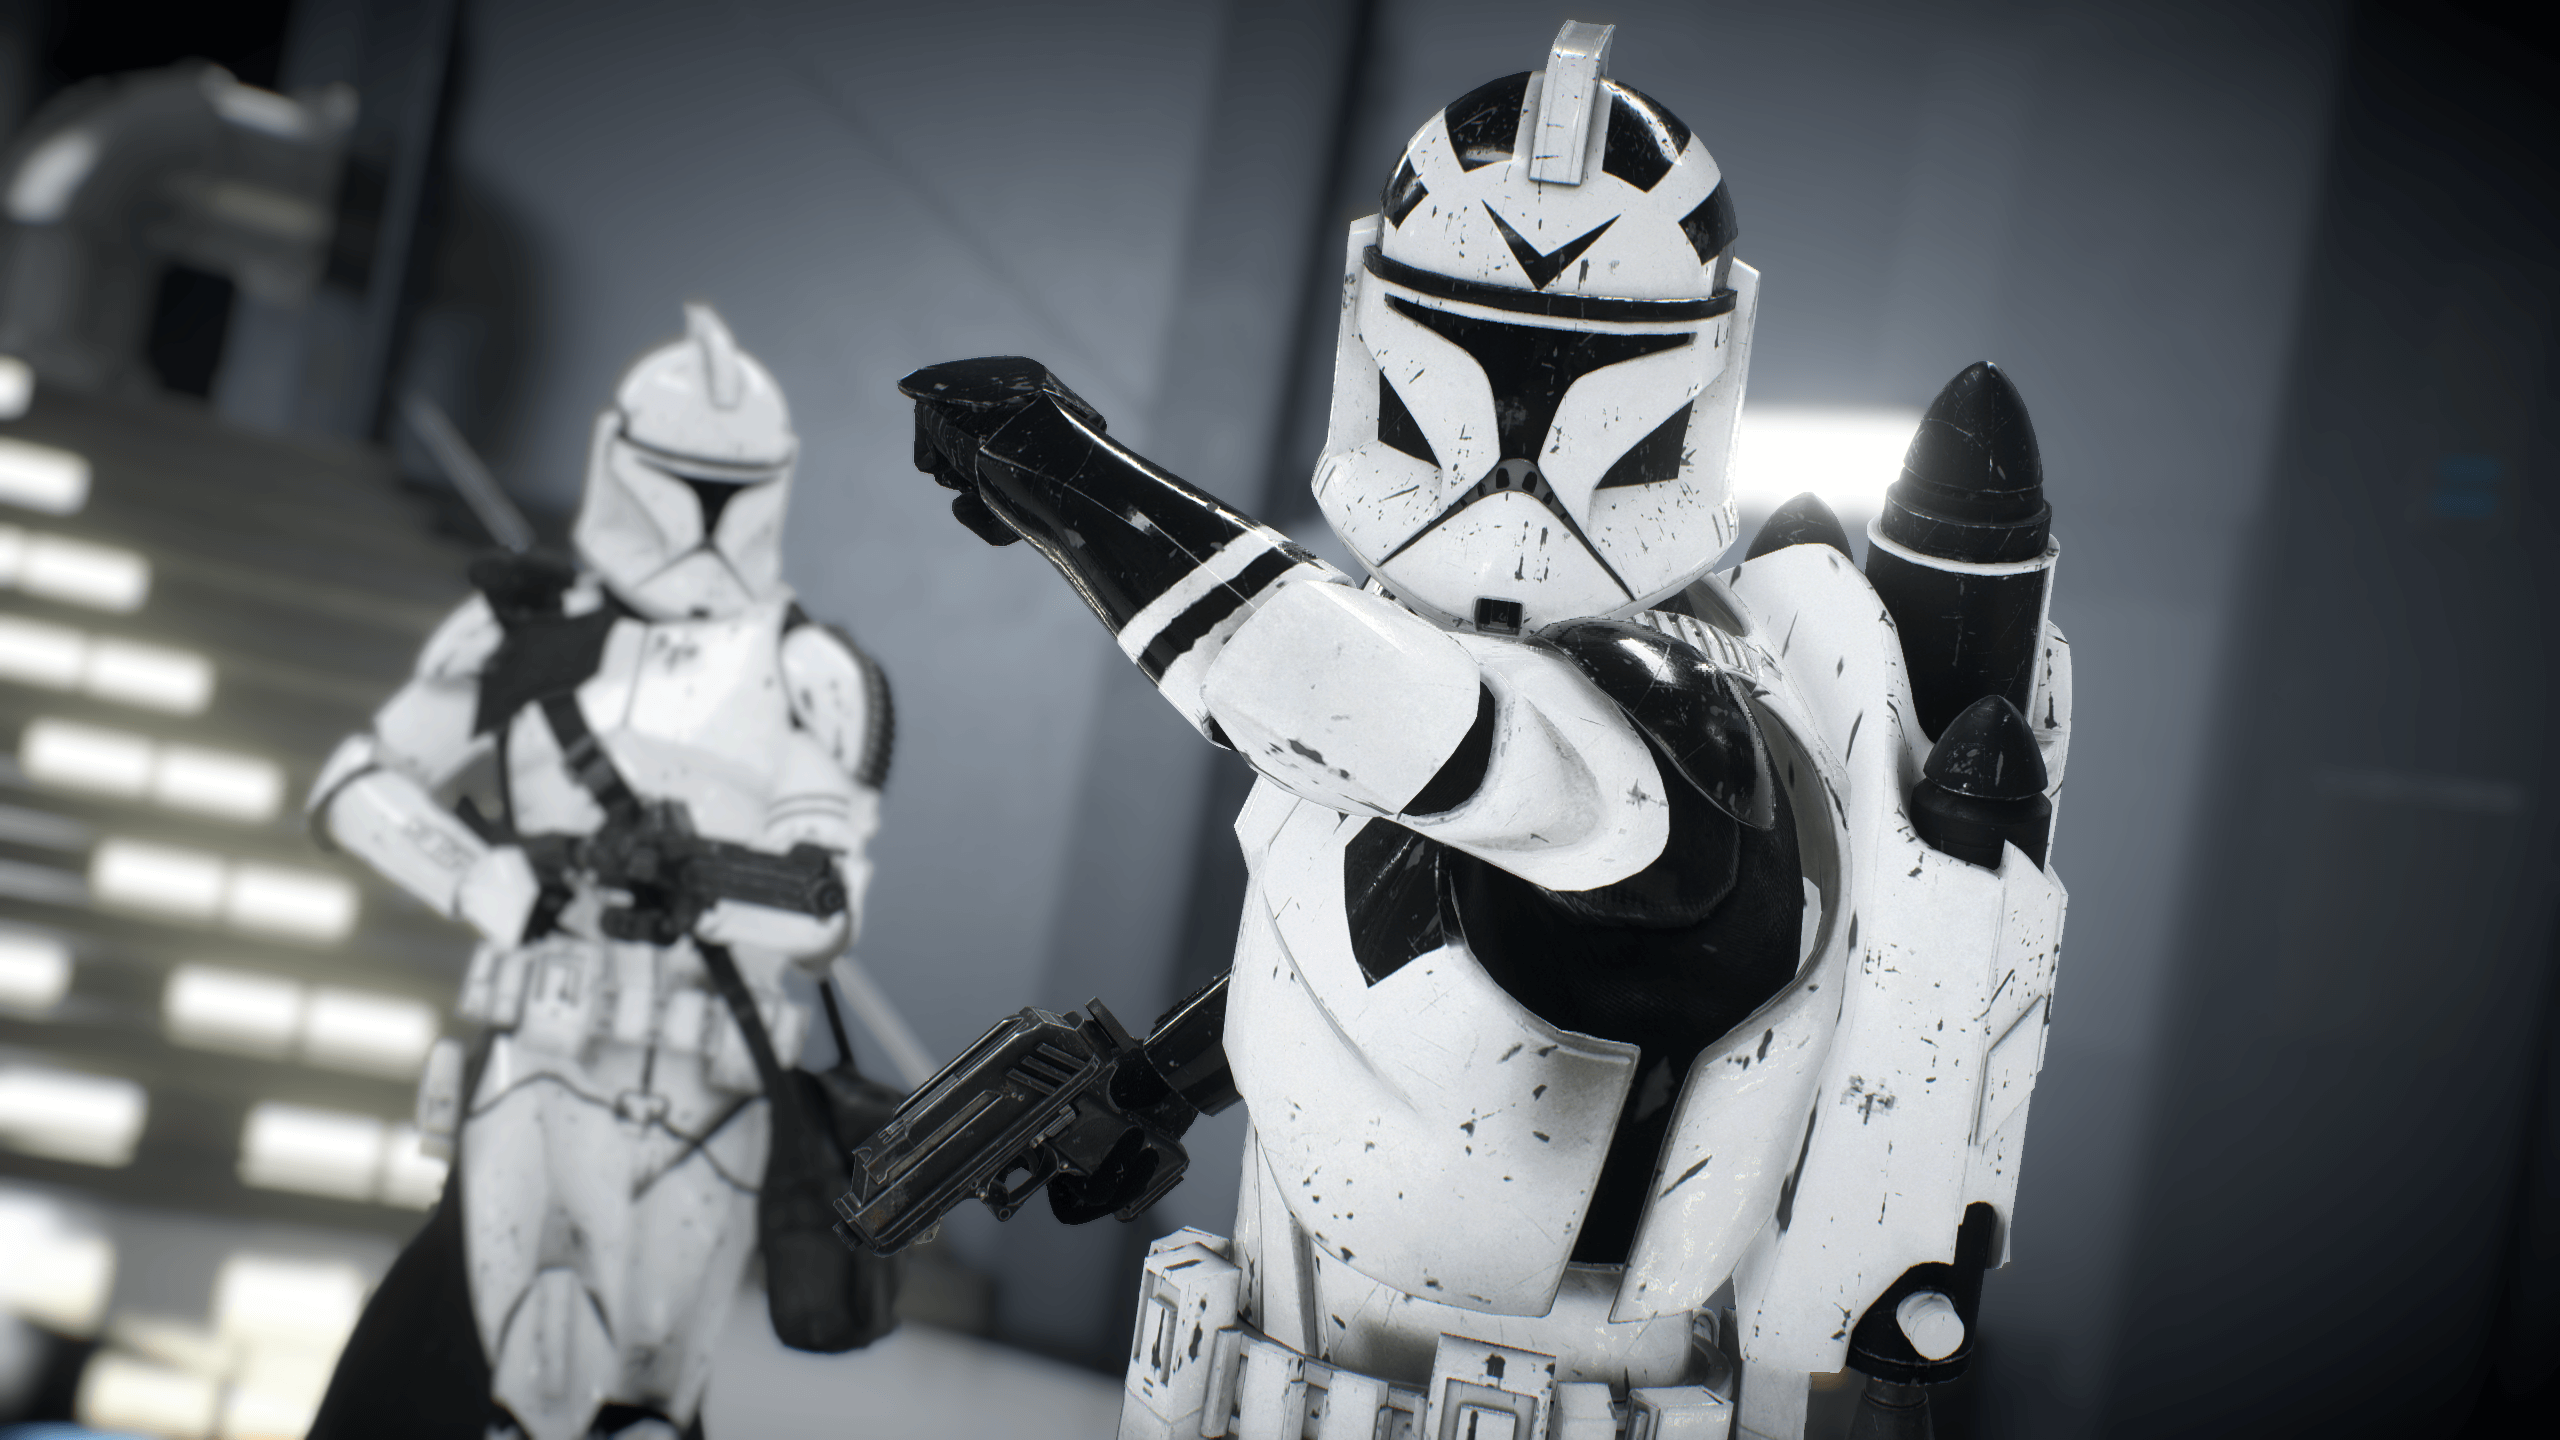 The Republic Jet Trooper is also cool as heck